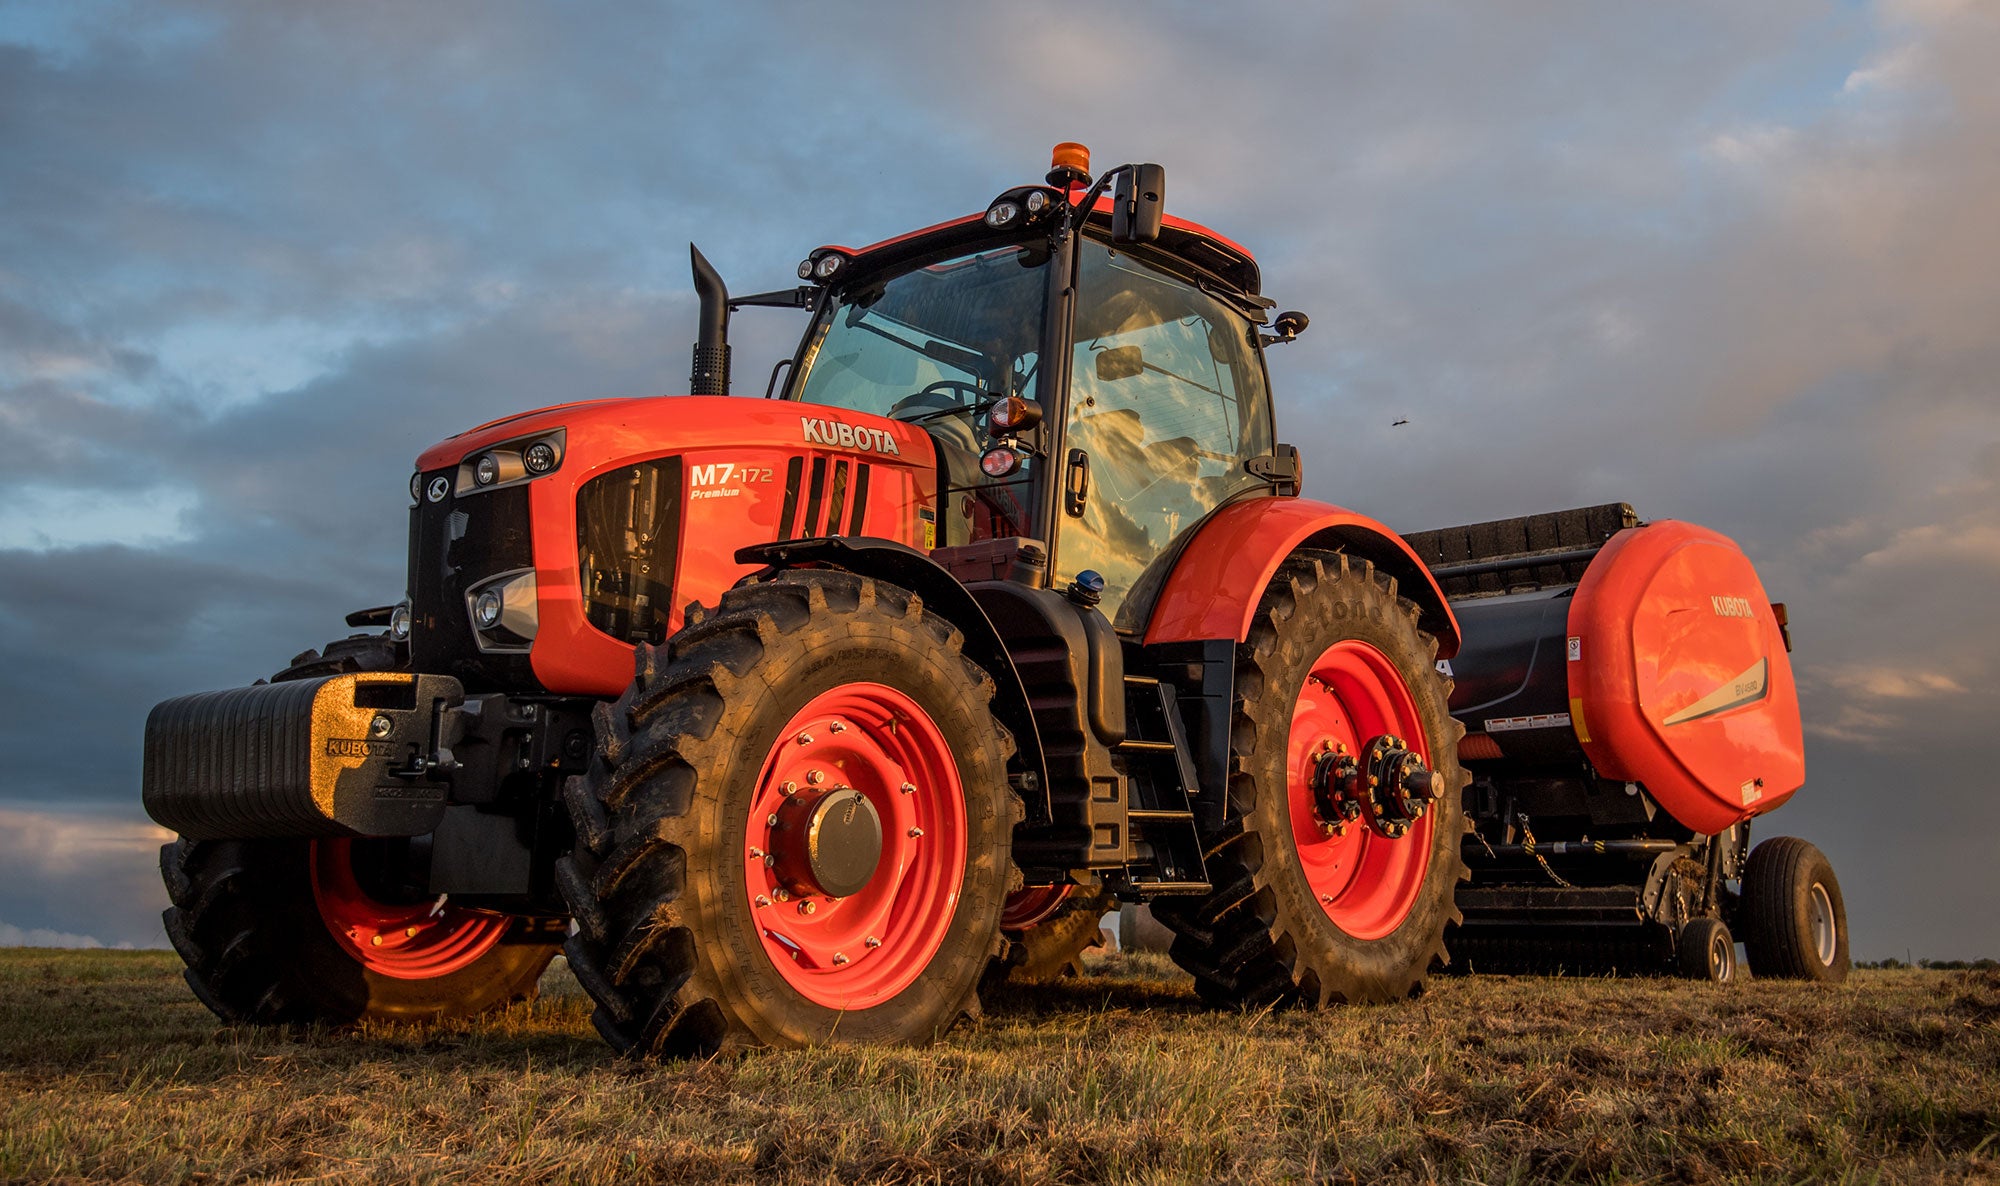 Kubota S 2nd Gen M7 Tractor Is Geared For Livestock Farmers Agdaily